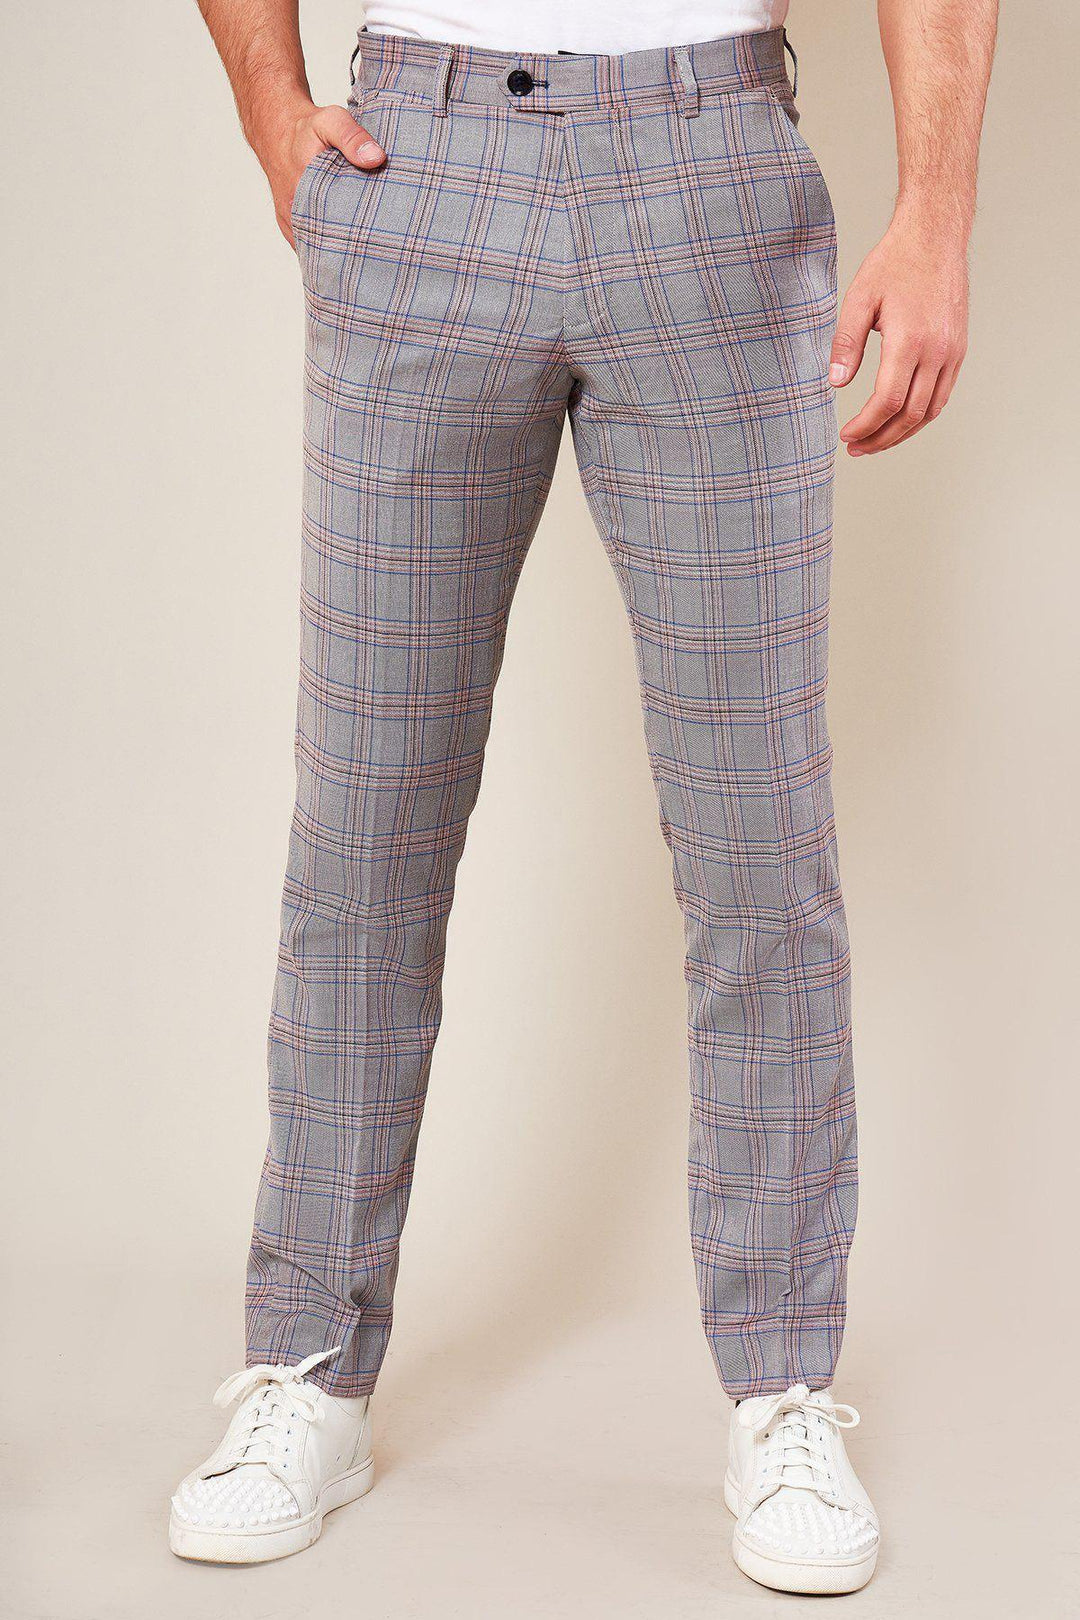 ALVIN - Grey Pink Check Trousers